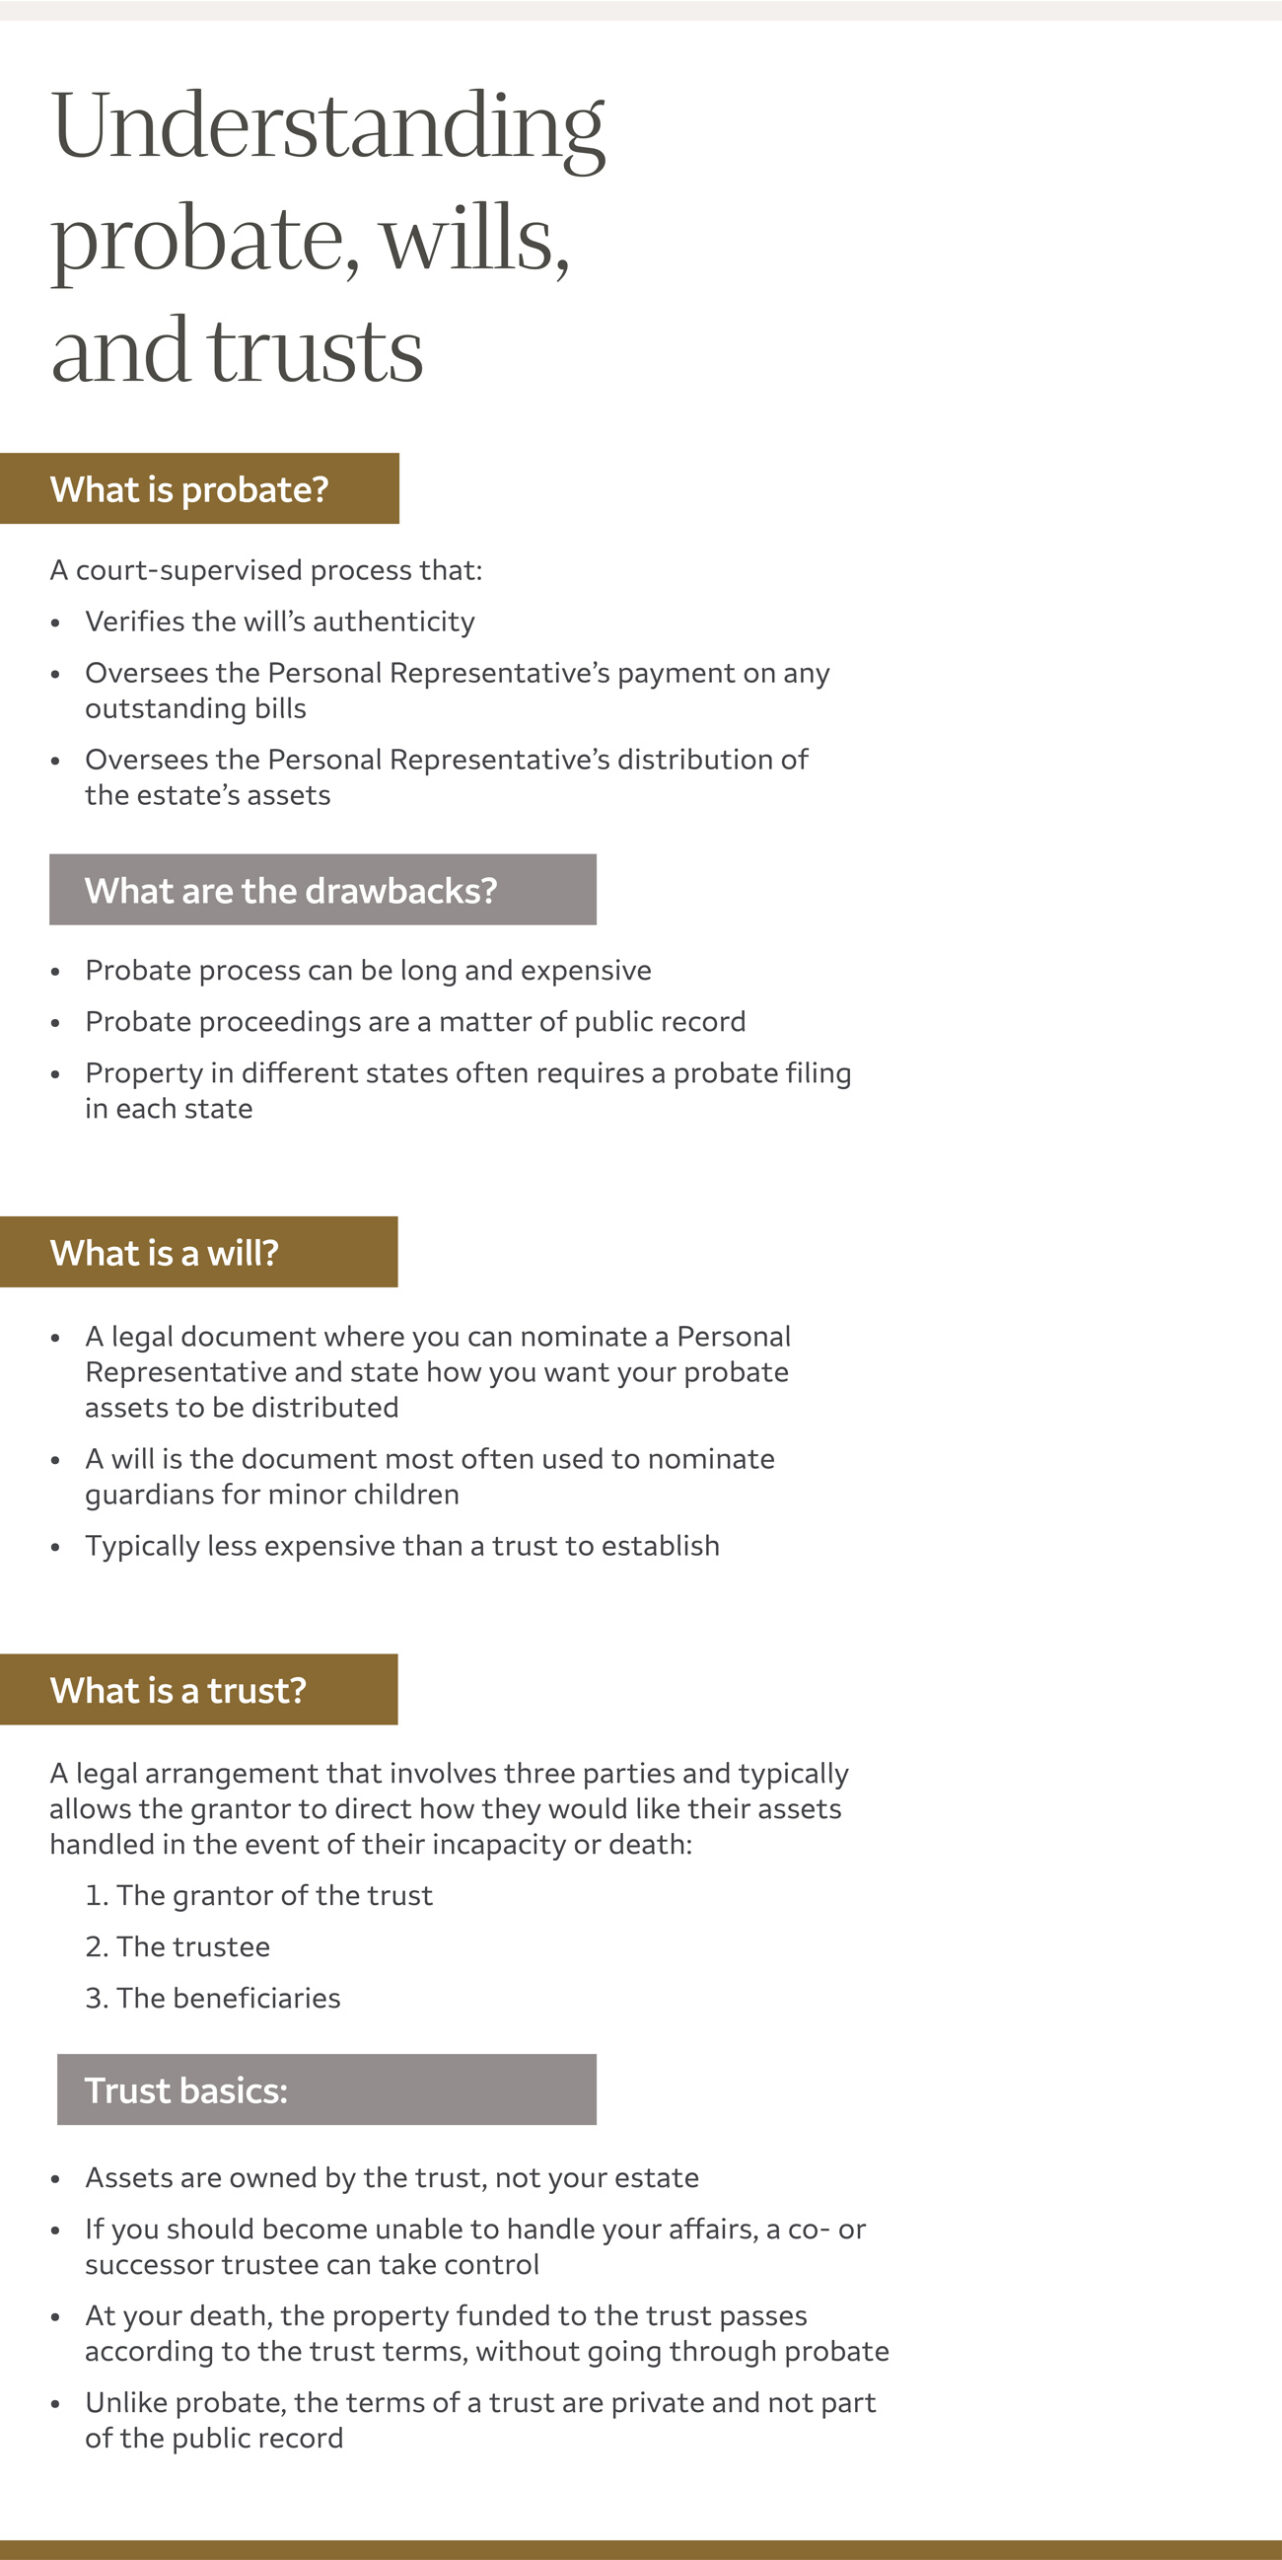 Infographic outlining the basics of probate, wills, and trusts. For details, click "view text alternative."